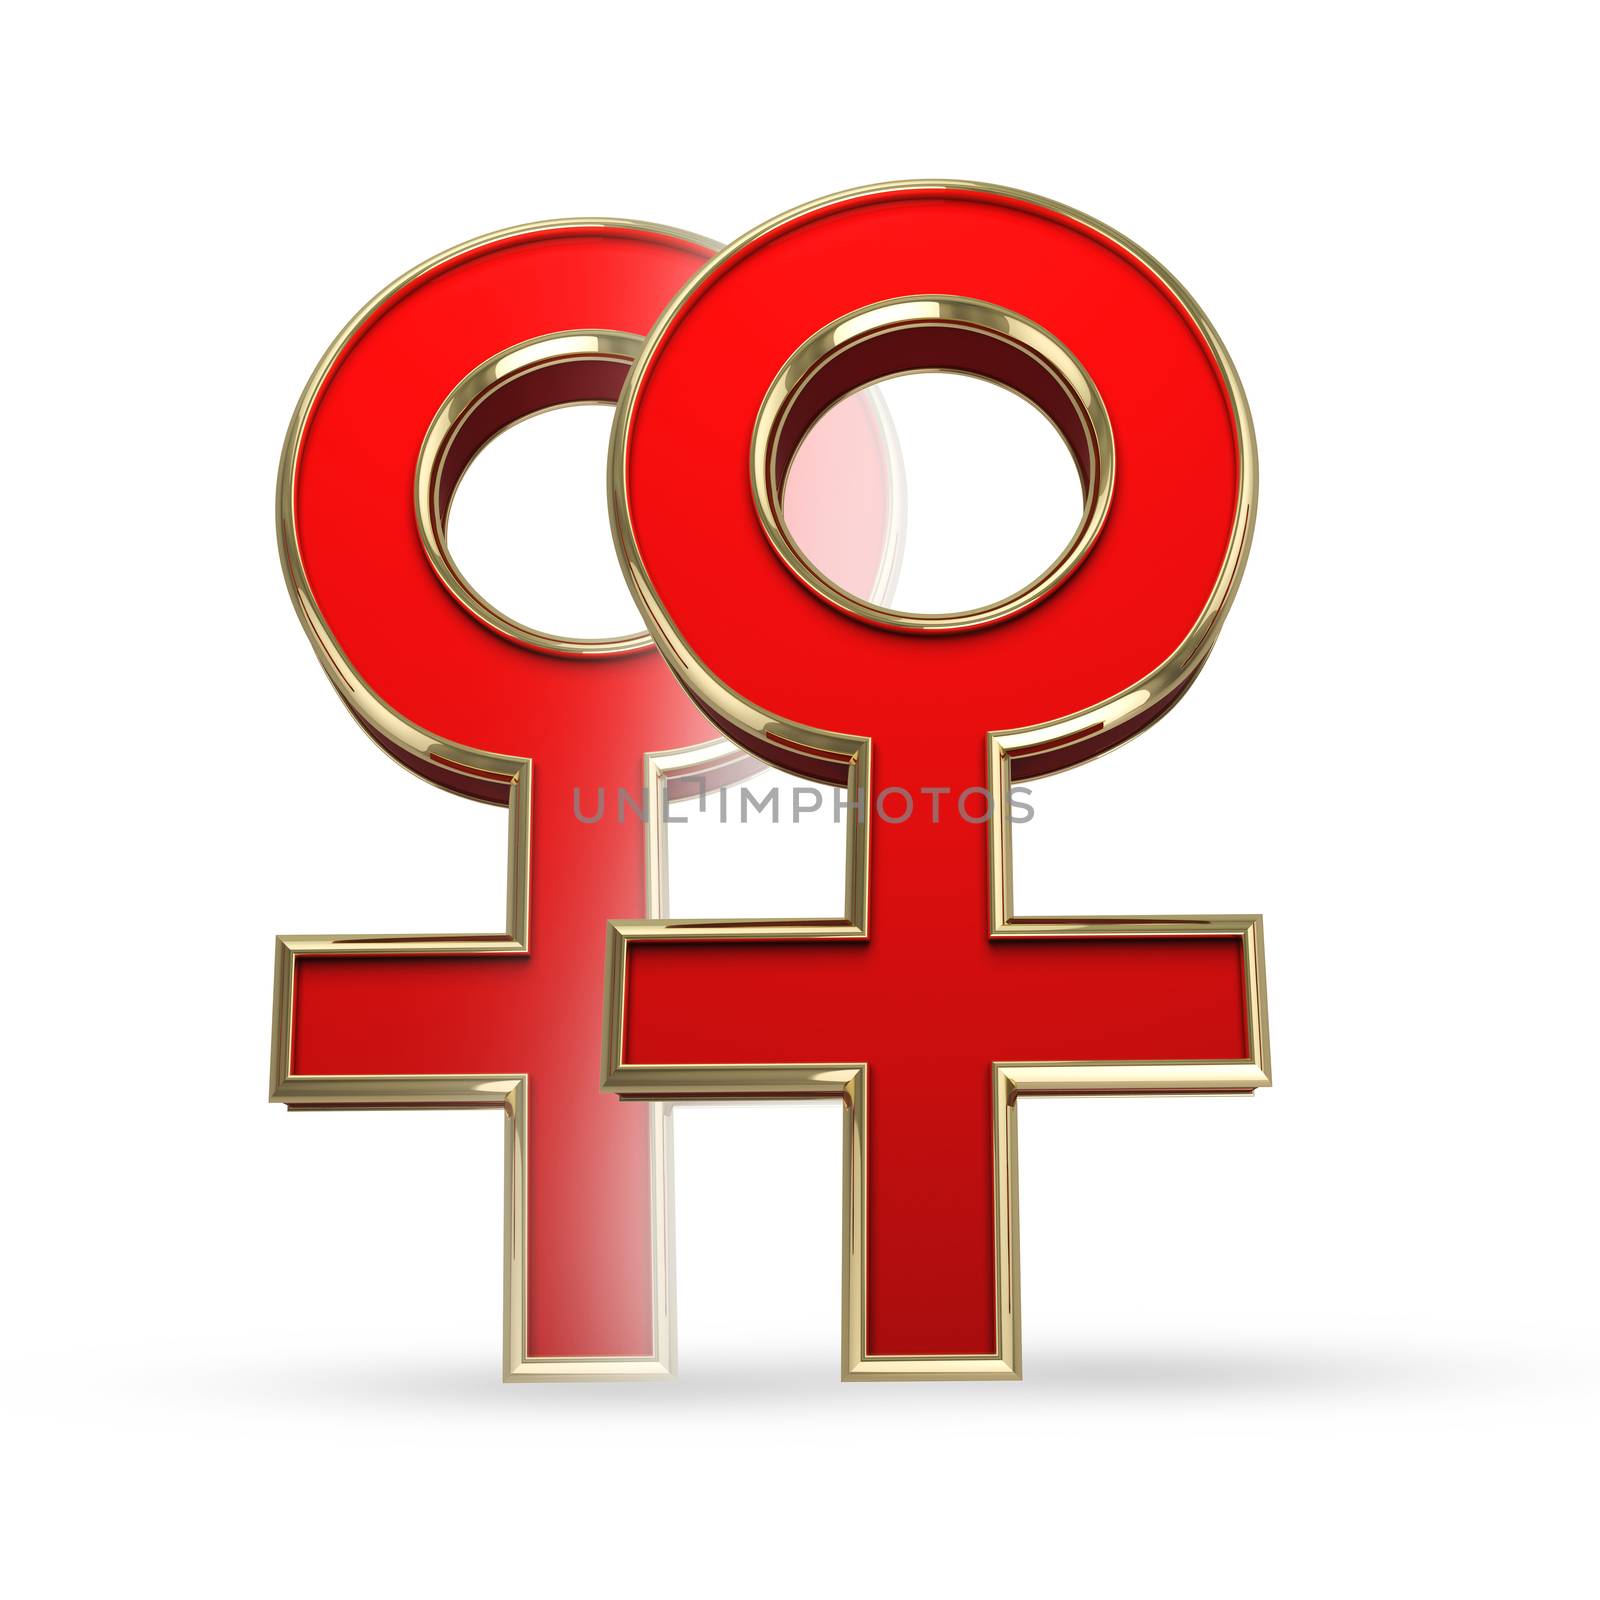 Lesbian sex symbol isolated on white background with clipping path